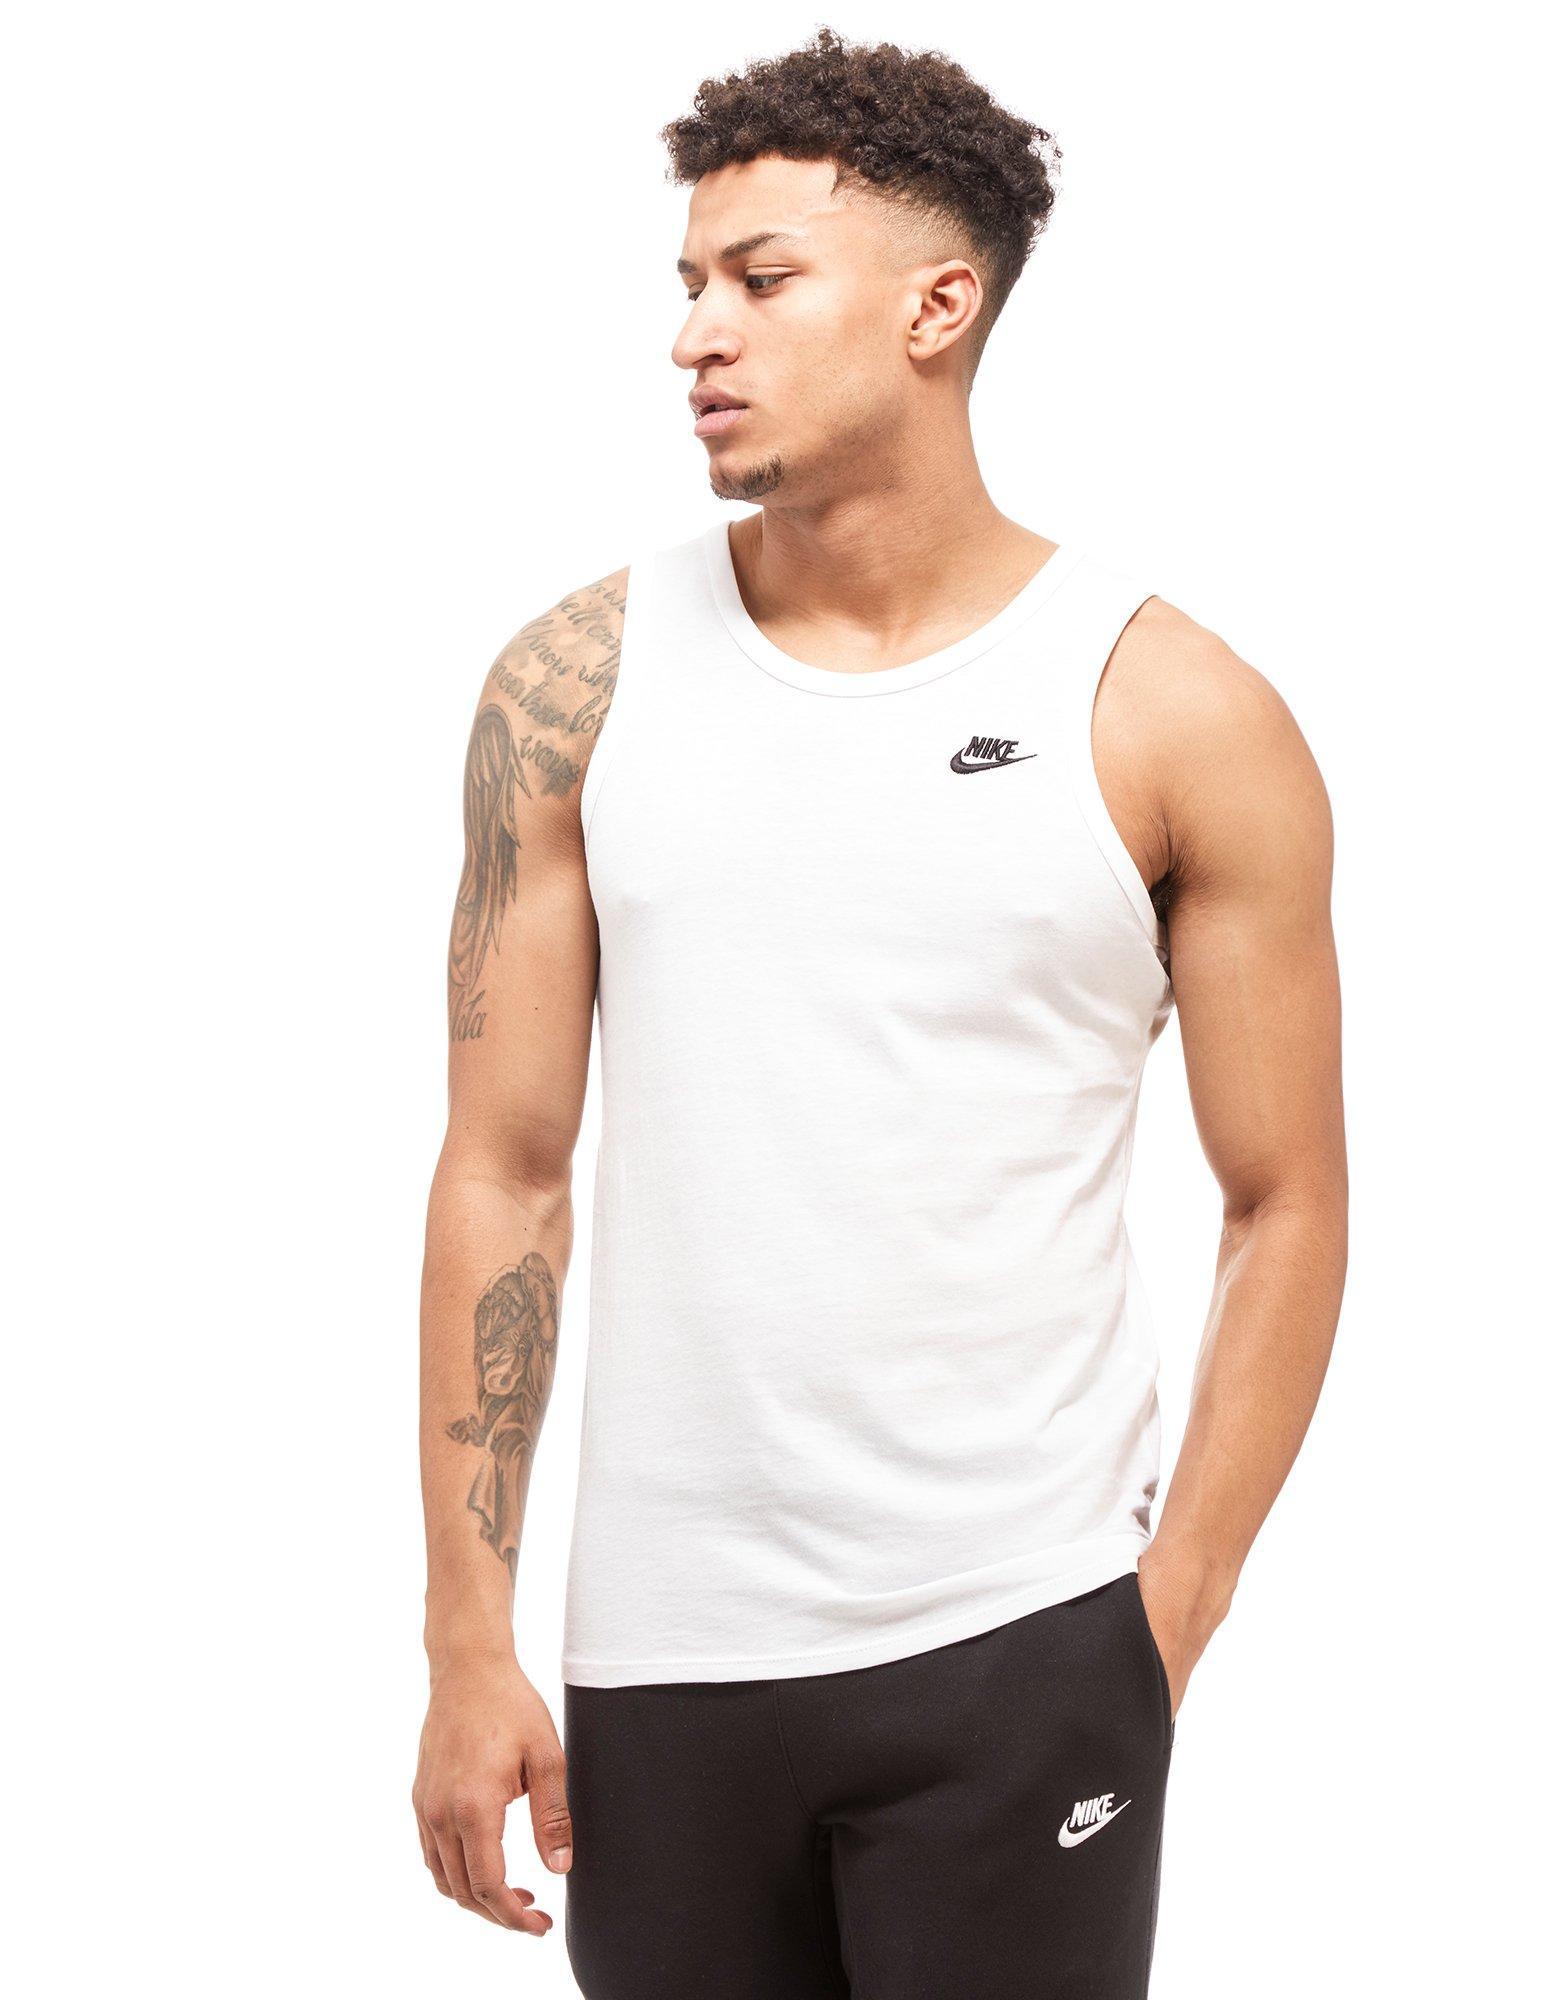 Nike Cotton Foundation Tank Top in 